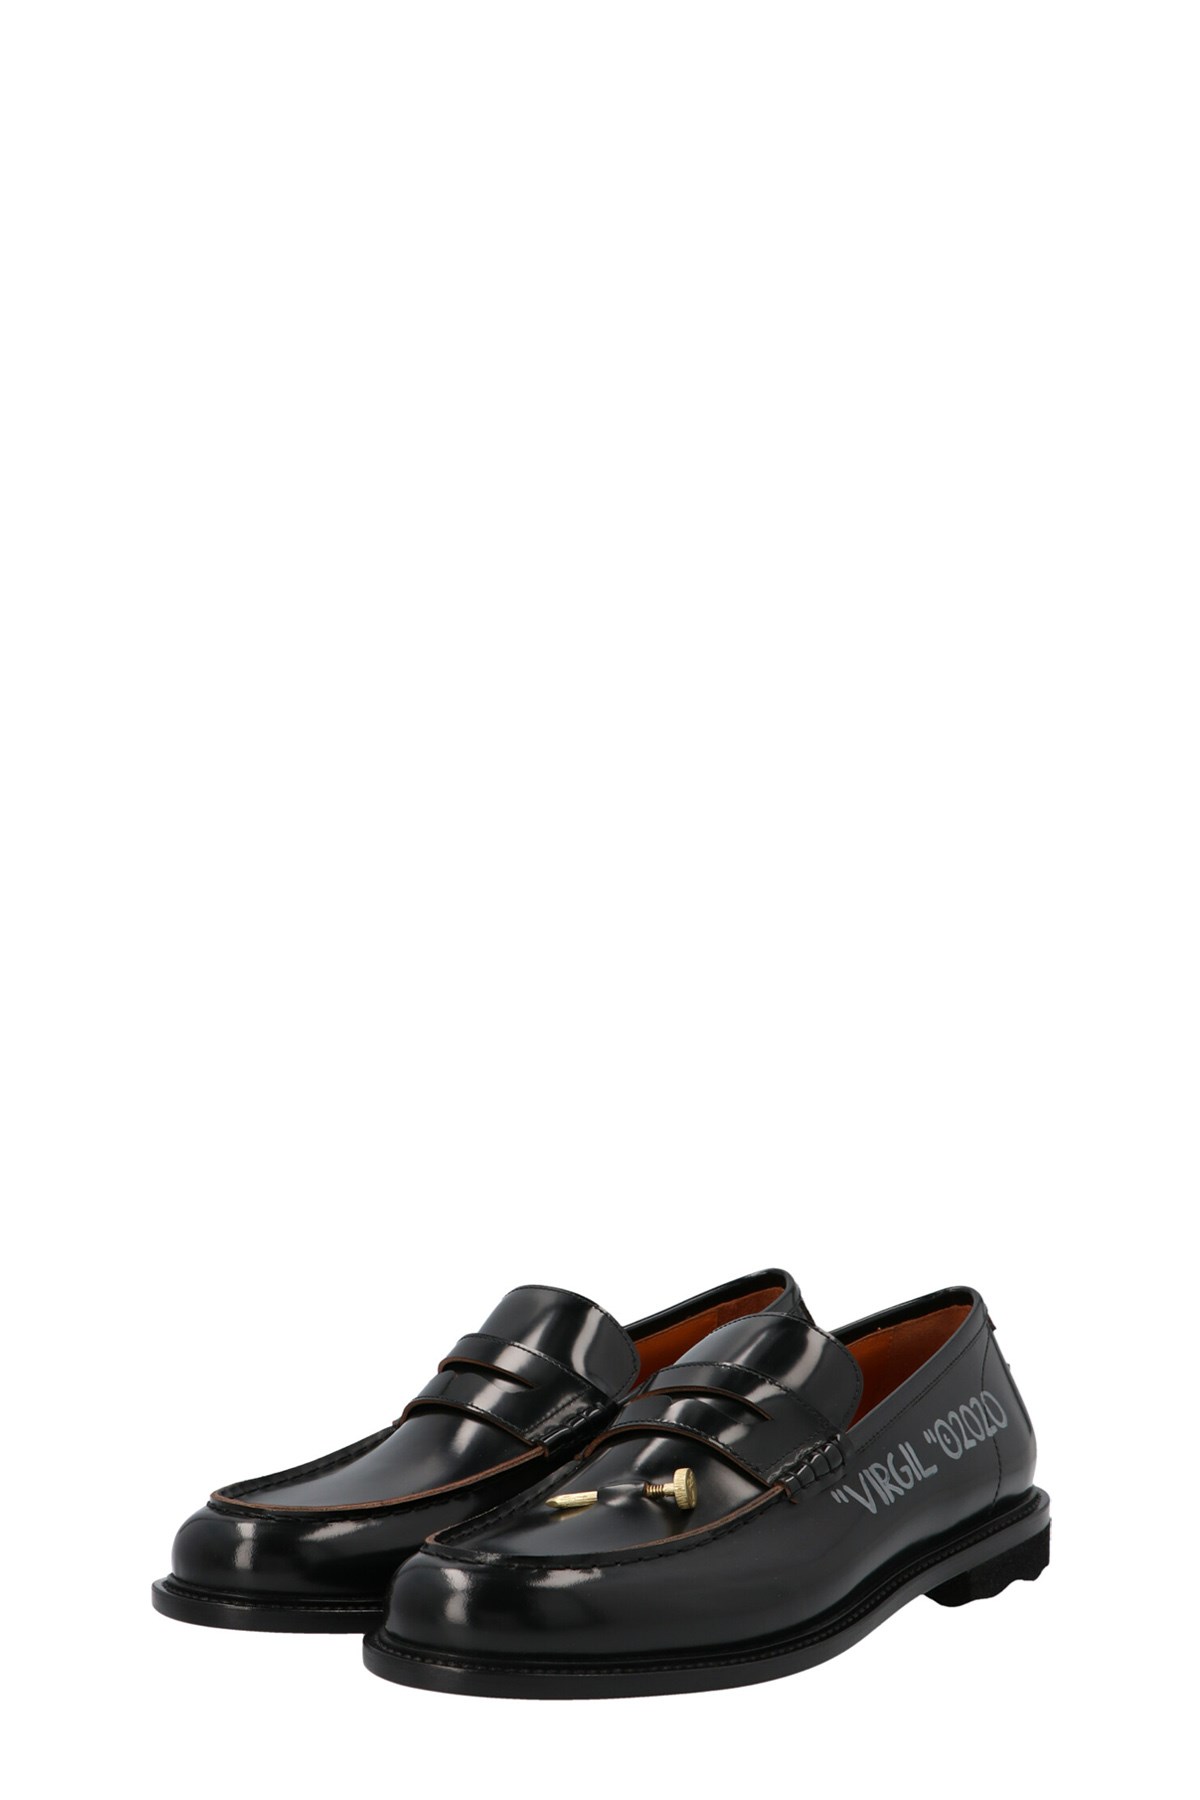 OFF-WHITE Offkat Collab.Loafers